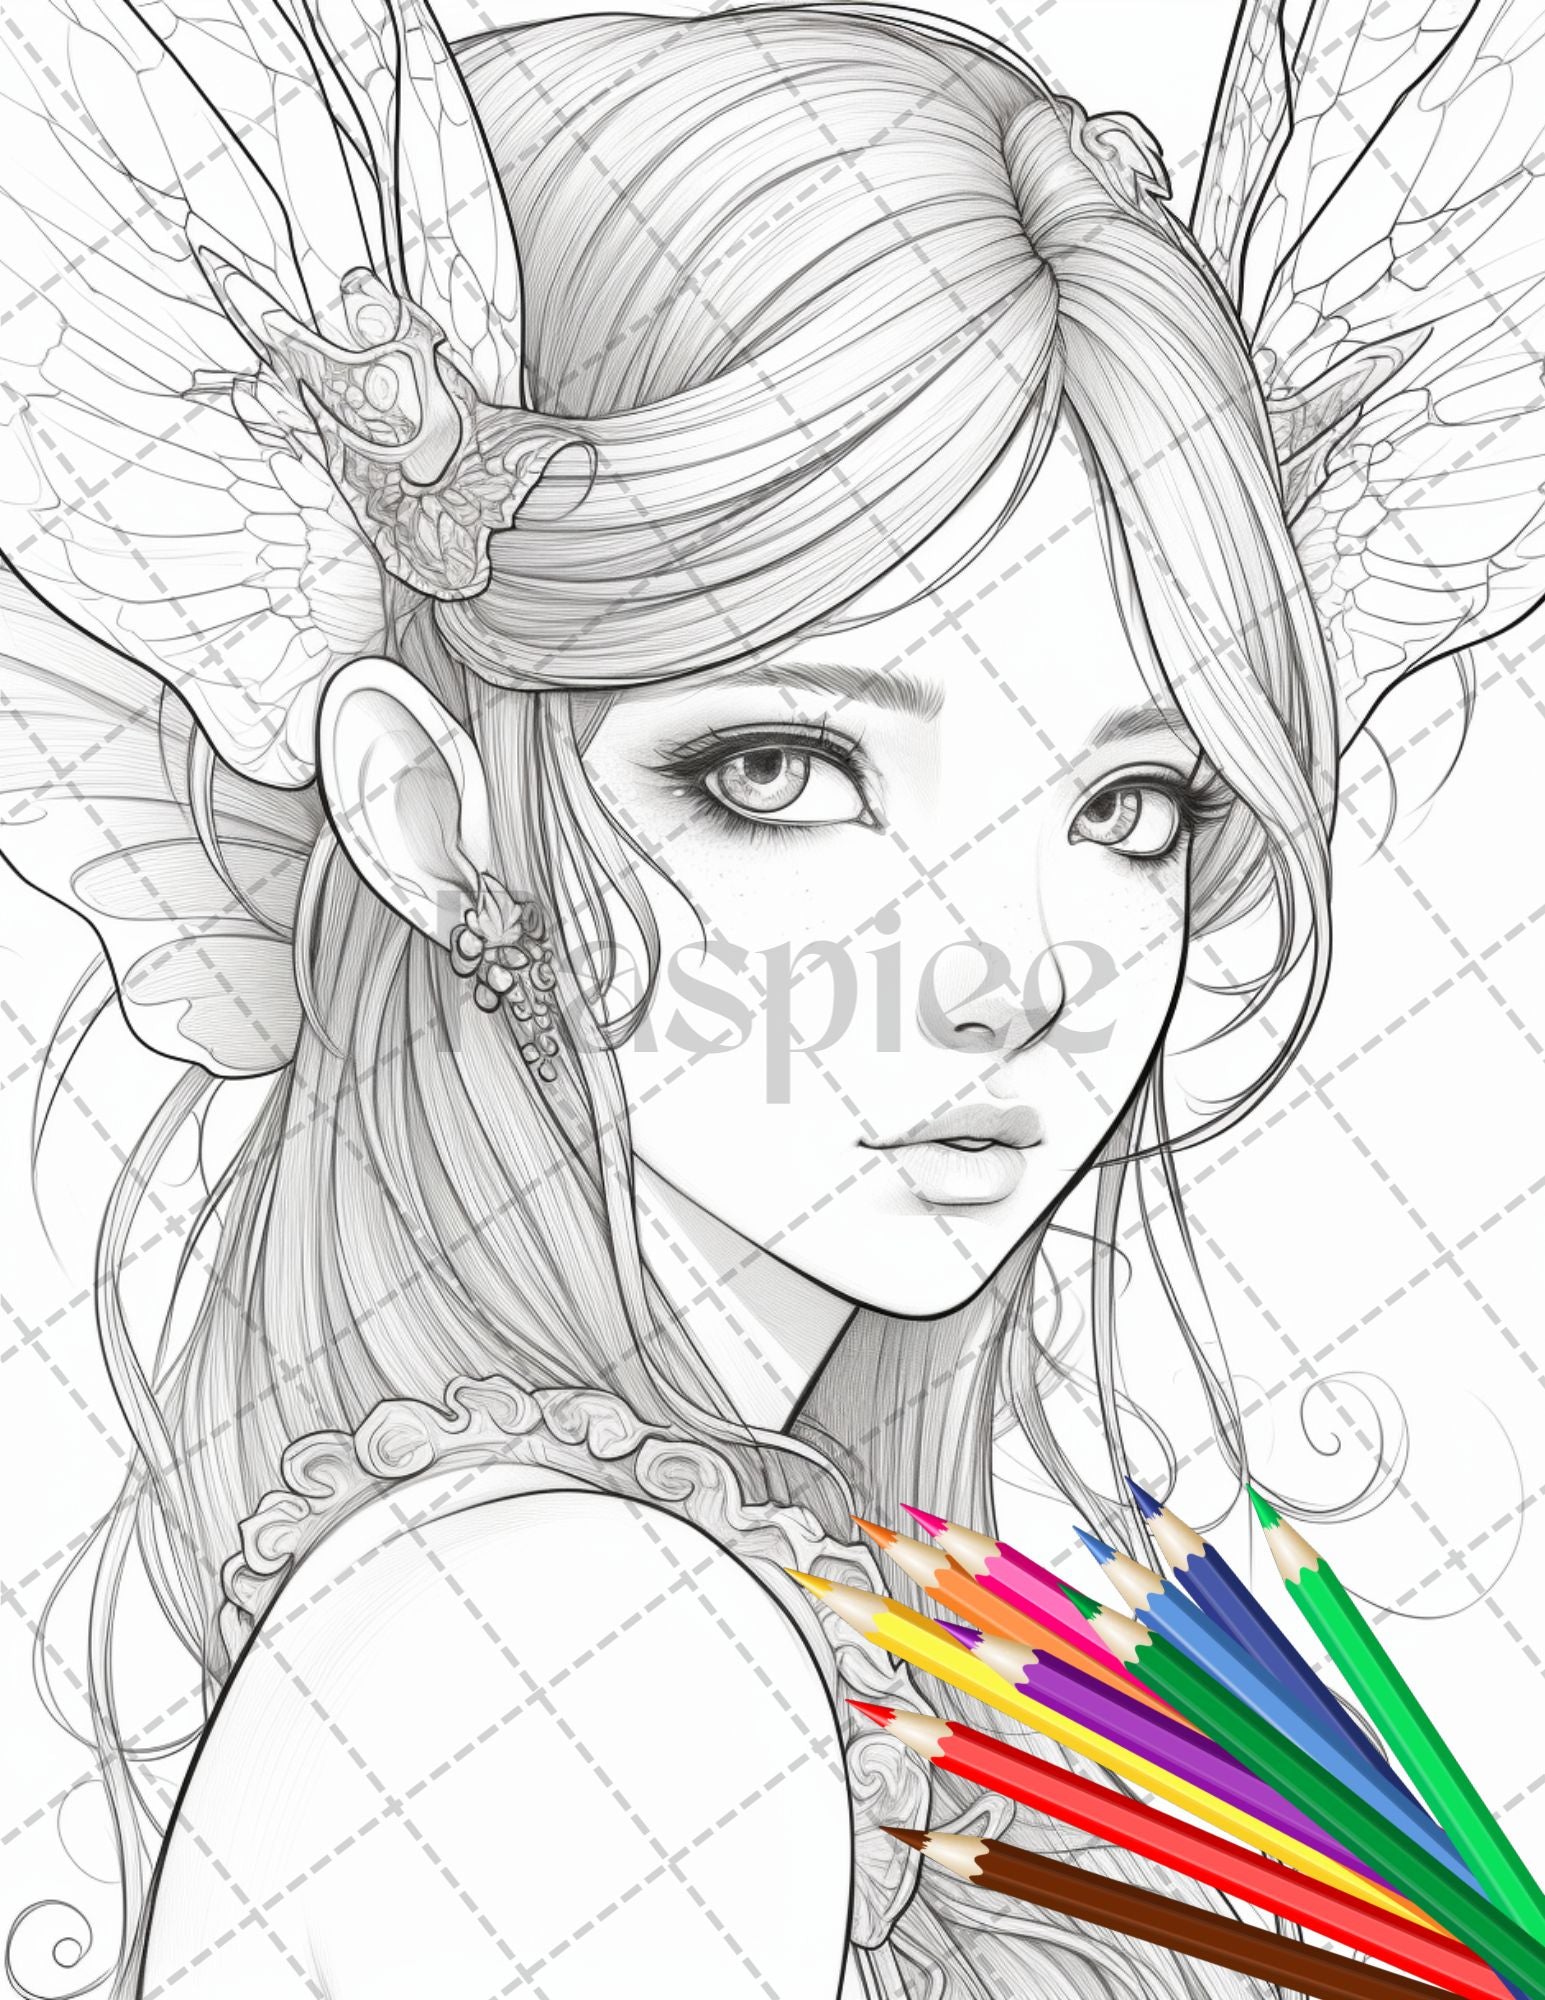 Buy Kawaii Chibi Fairy Coloring Page Printable Adult Coloring Online in  India  Etsy